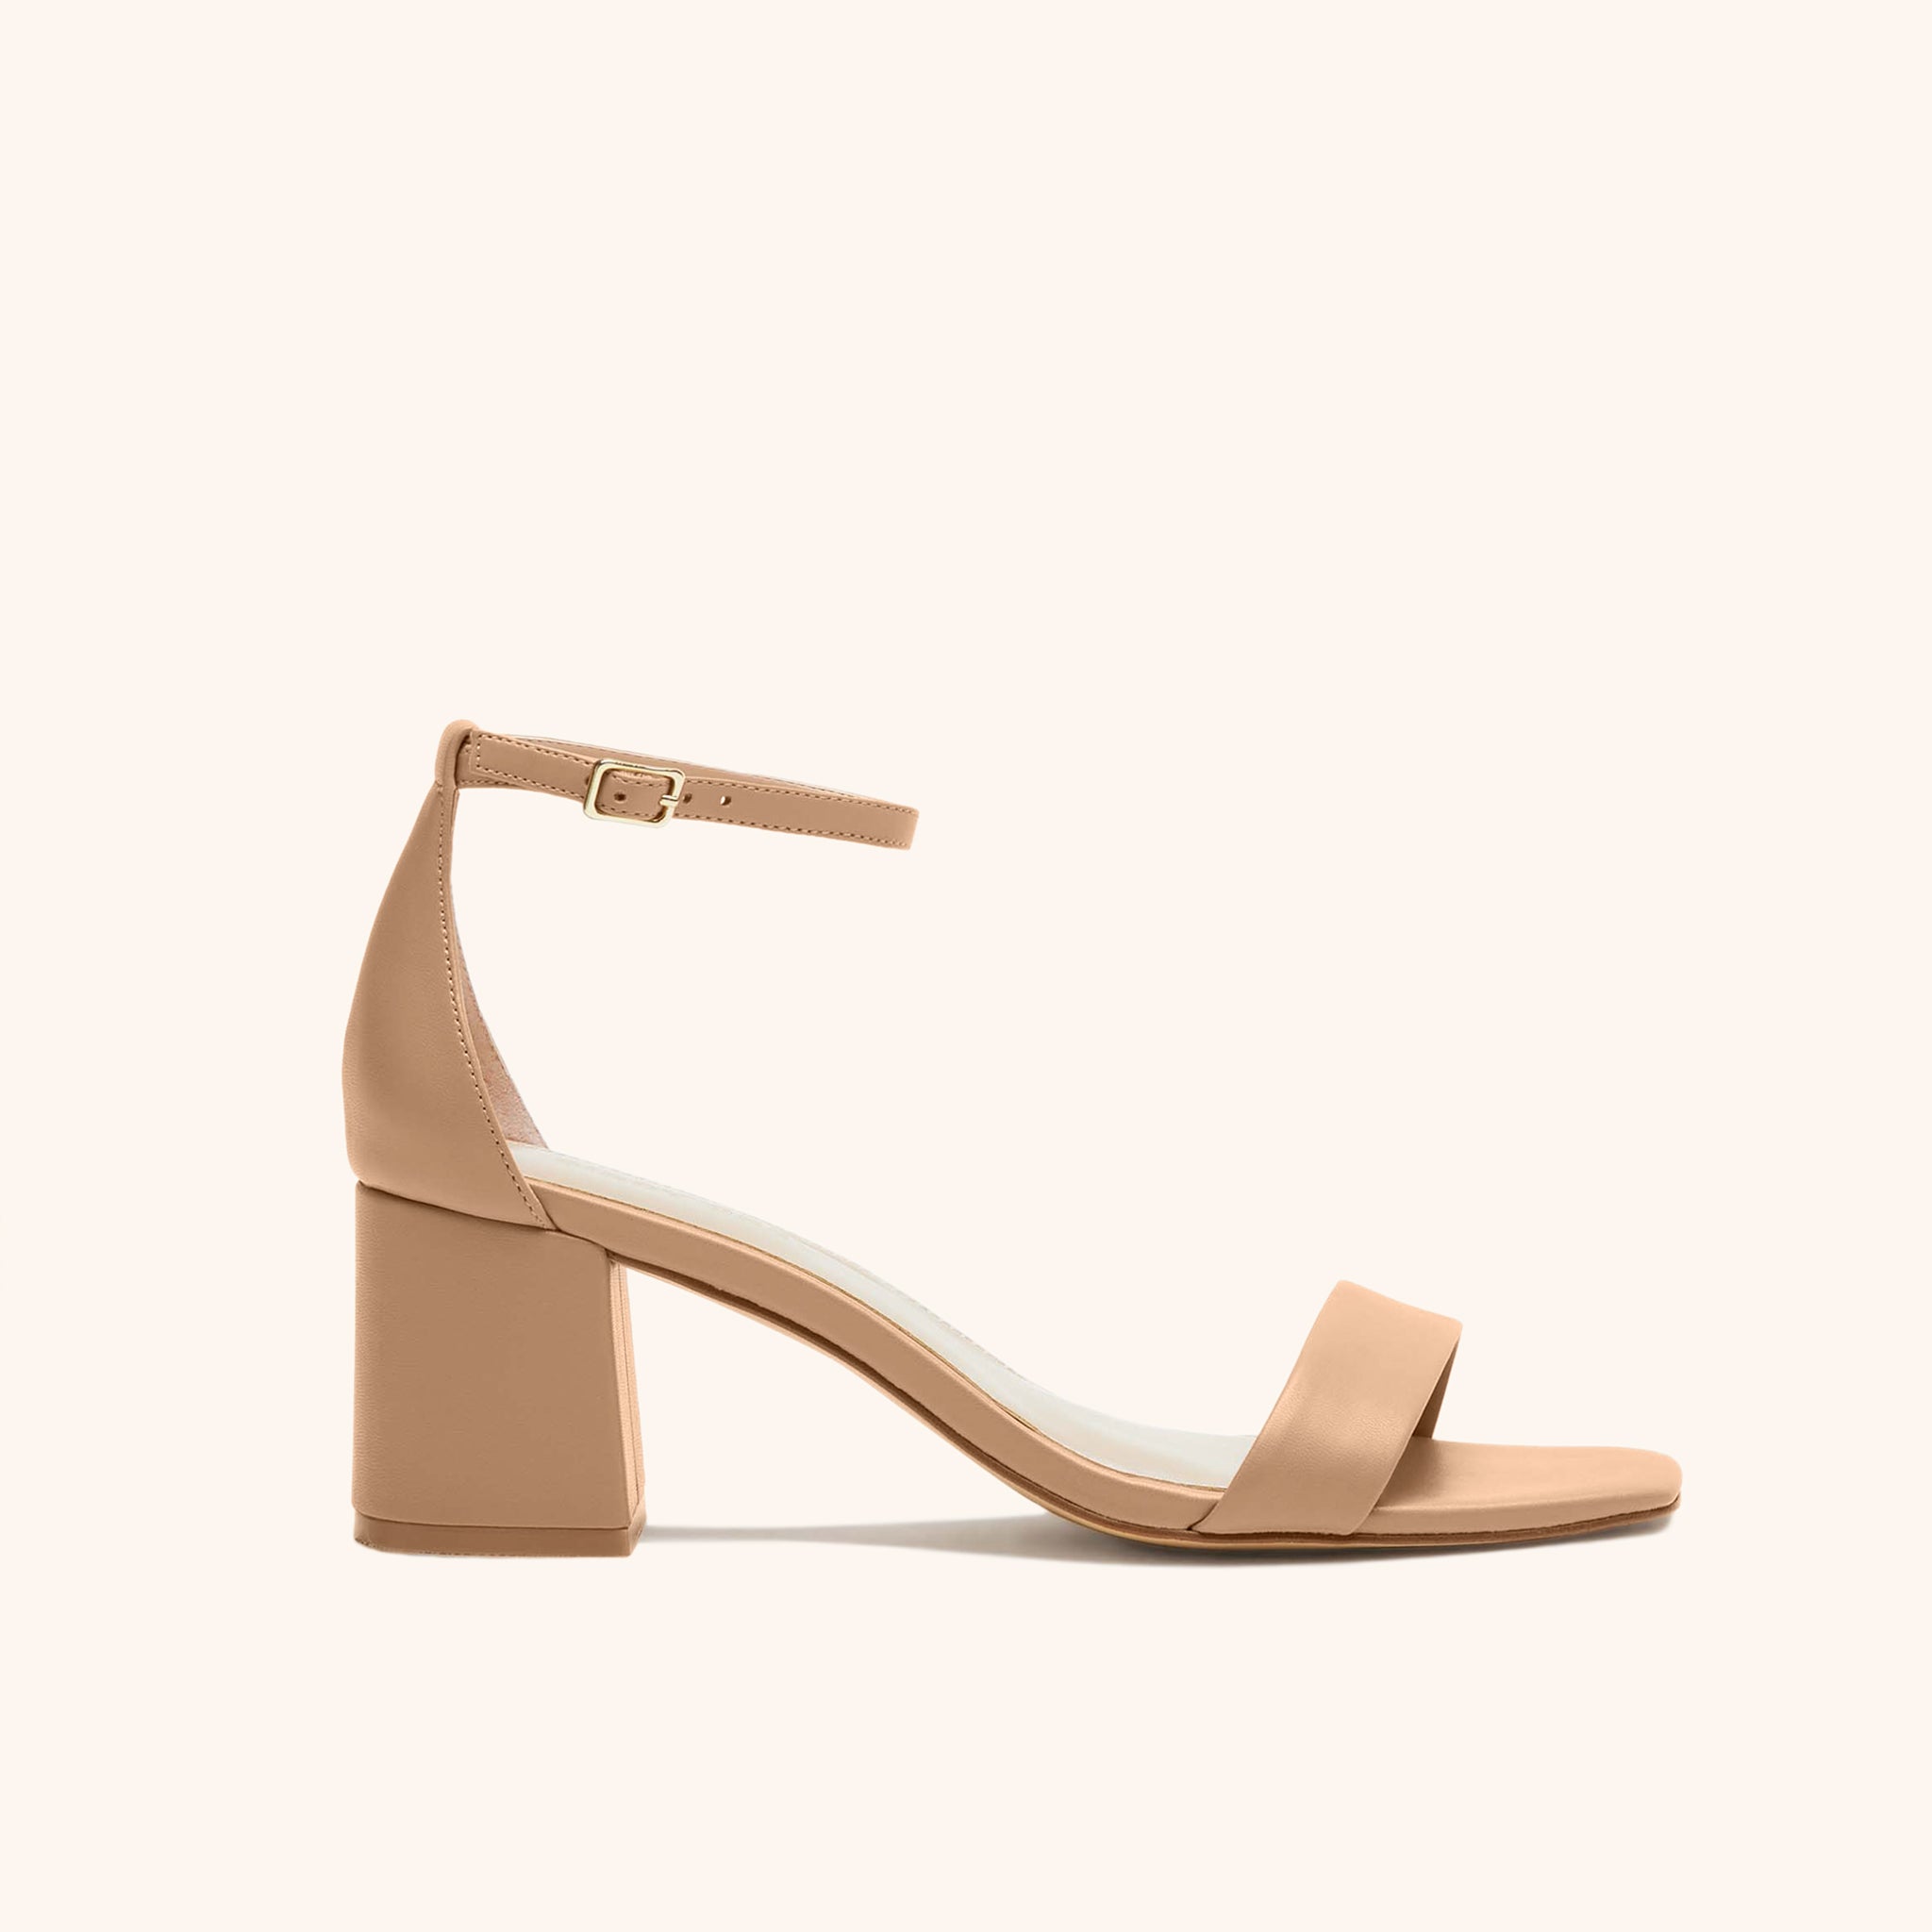 Side product view of the Natalie Chunky Heel shoe in nude latte in vegan leather with open toe, enclosed heel, a two and one half inch block chunky heel, and adjustable buckle ankle strap. 